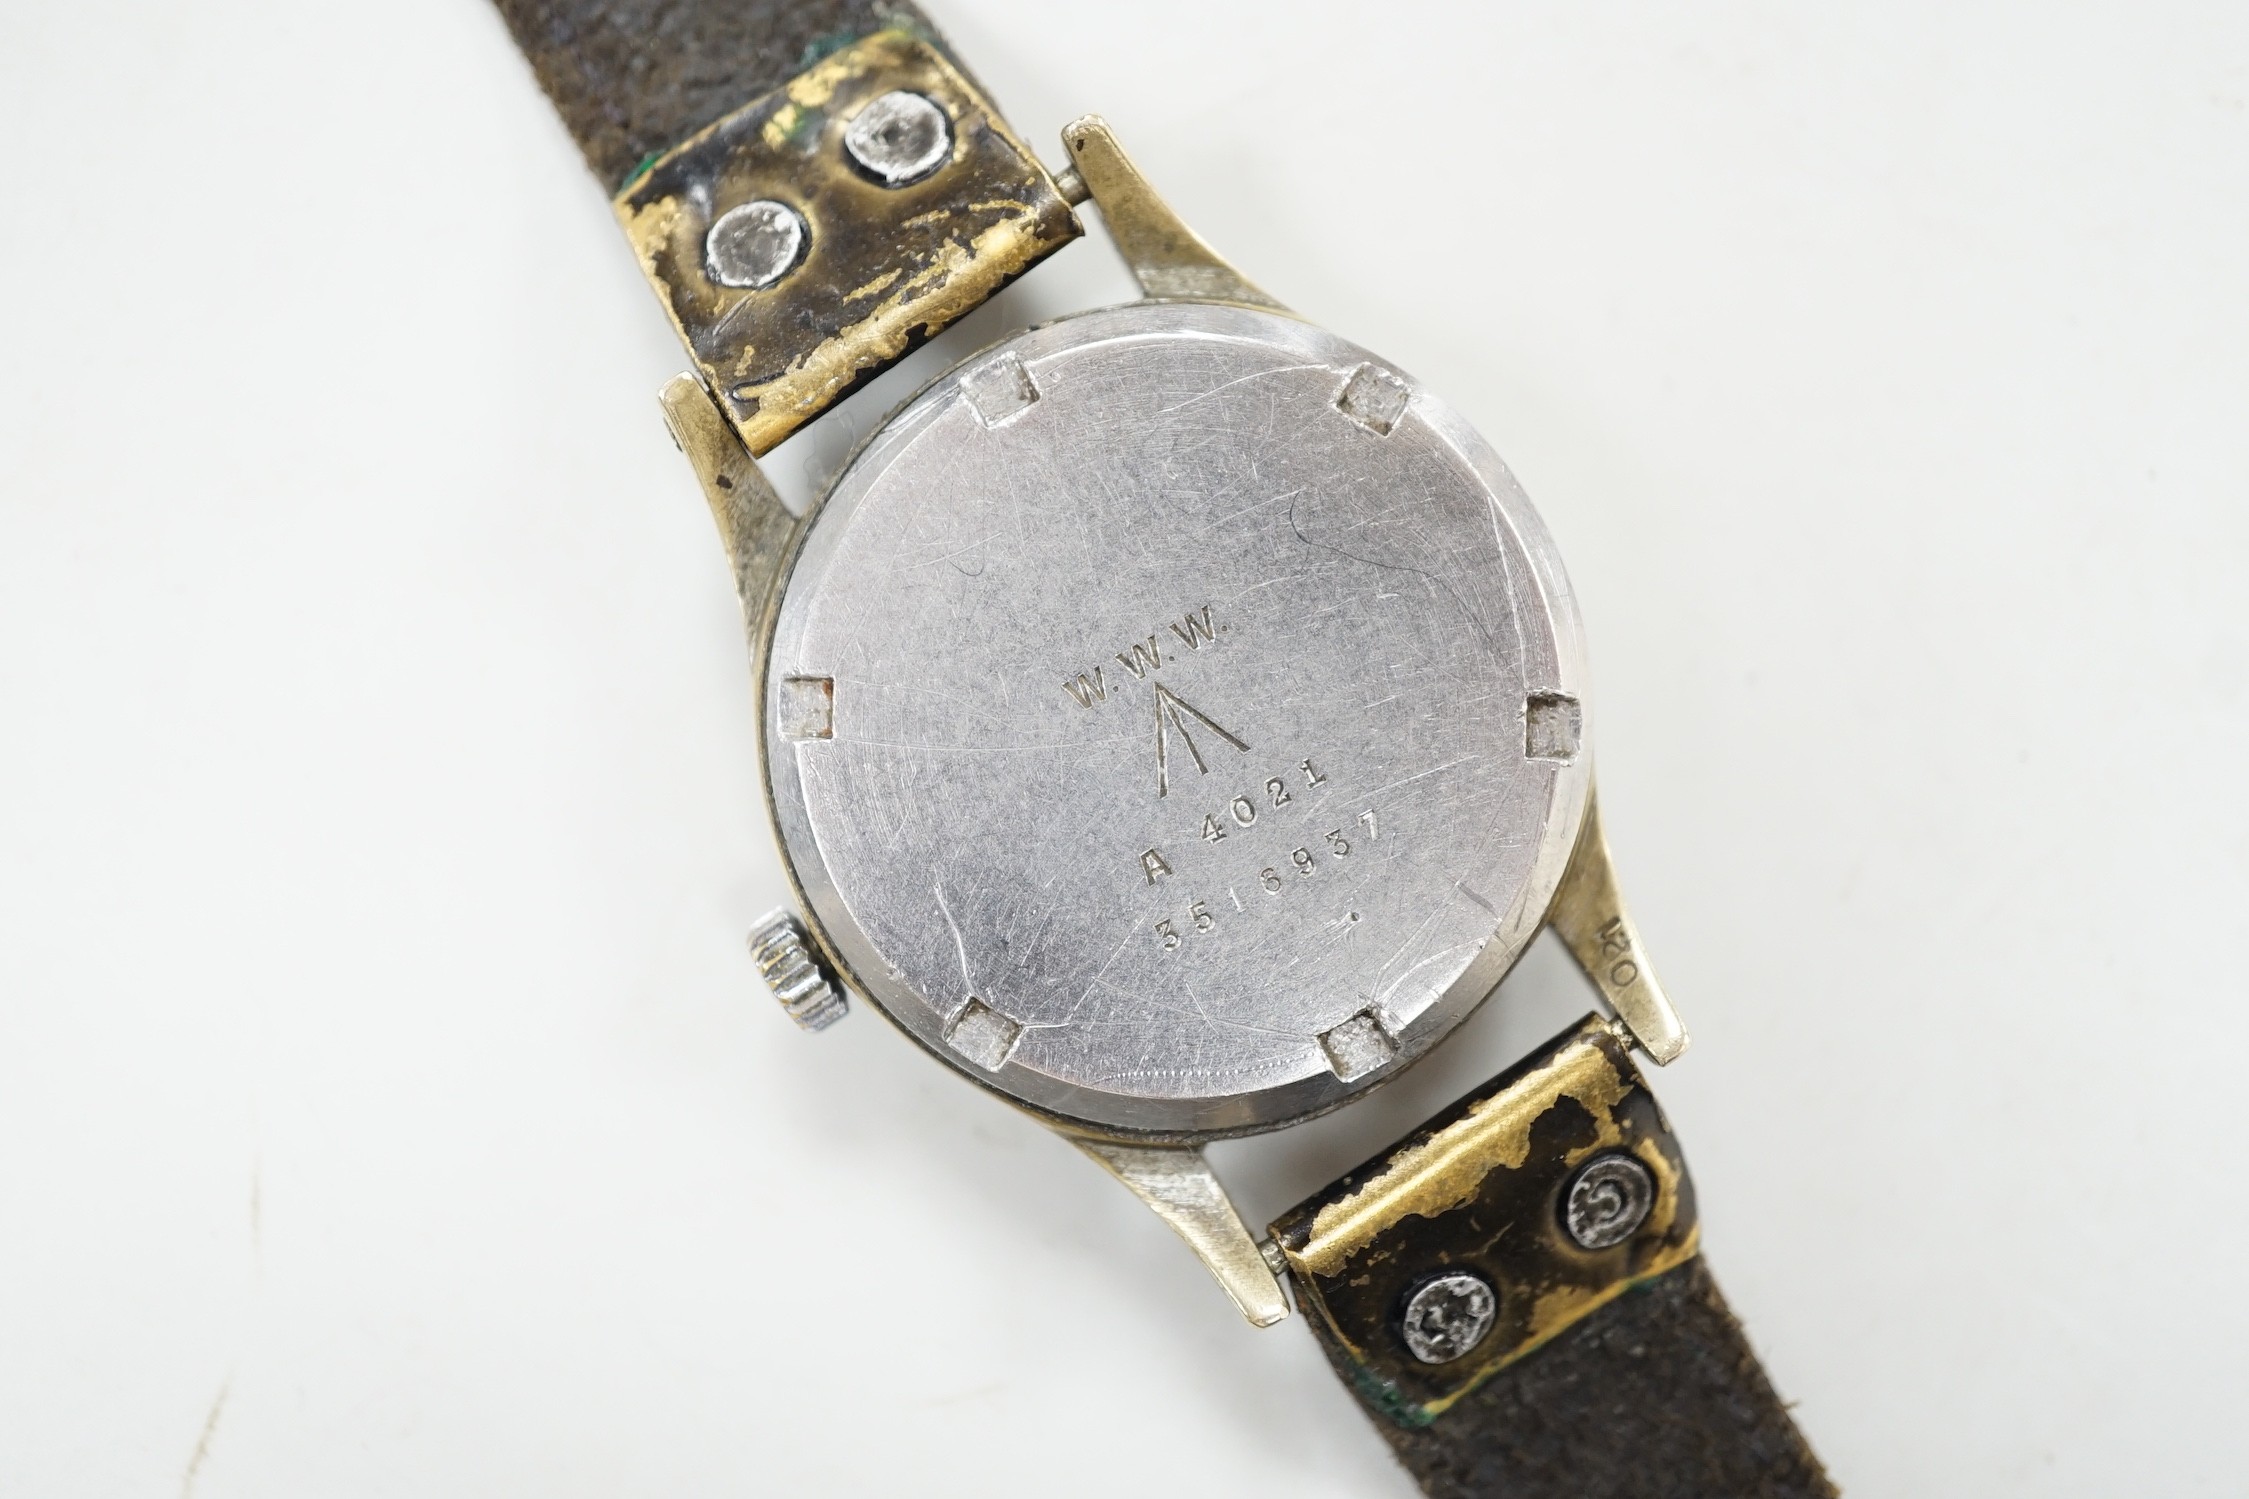 A gentleman's 1940's/1950's military issue steel Vertex manual wind black dial wrist watch (one of the 'dirty dozen' watches), the case back engraved WWW with broad arrow and numbered A 4021 3516937, on a leather strap,